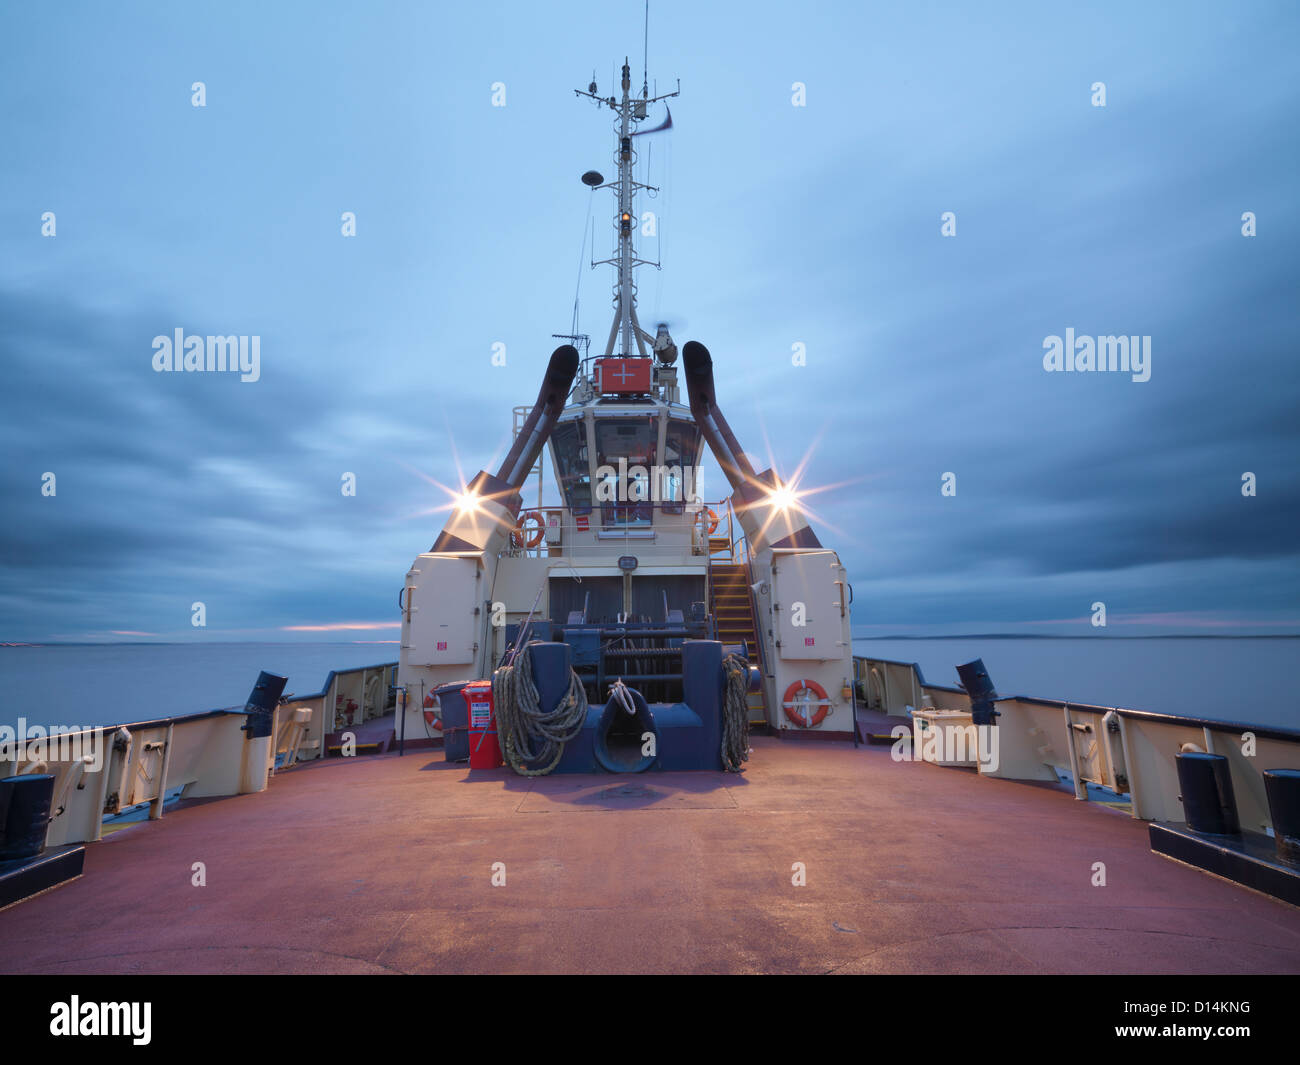 Tugboat deck lit up at night Stock Photo